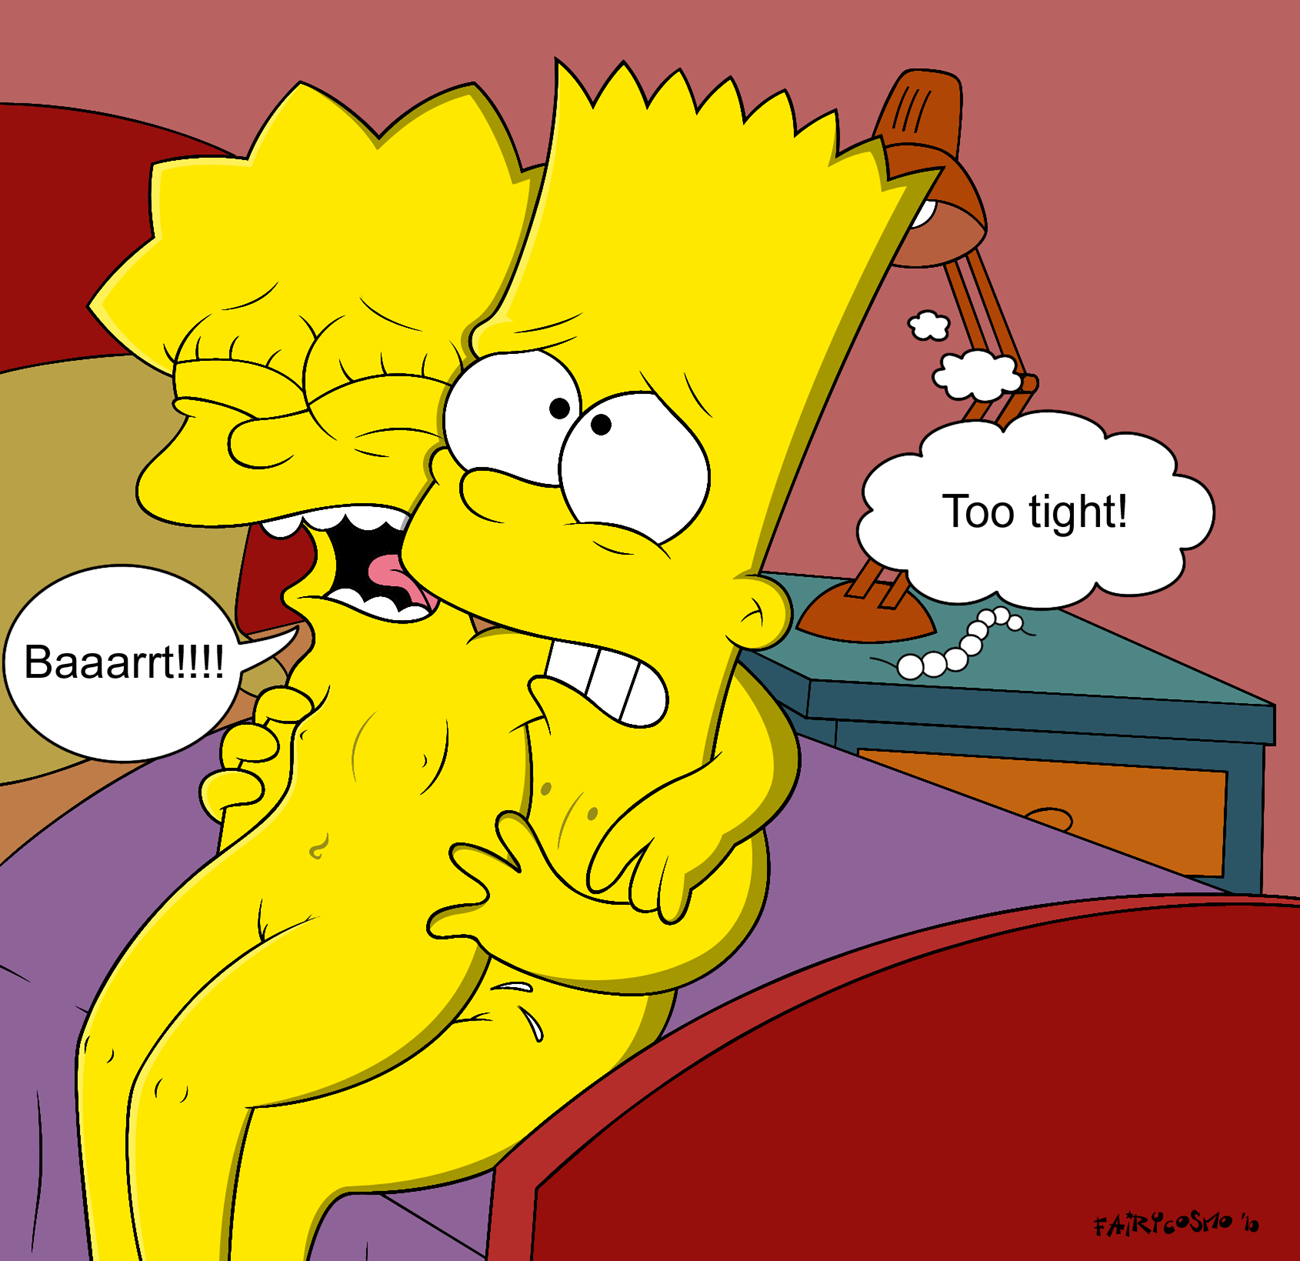 Simpsons Anal Porn - For free! - Simpsons Porn Pictures Bart - Very Simple!